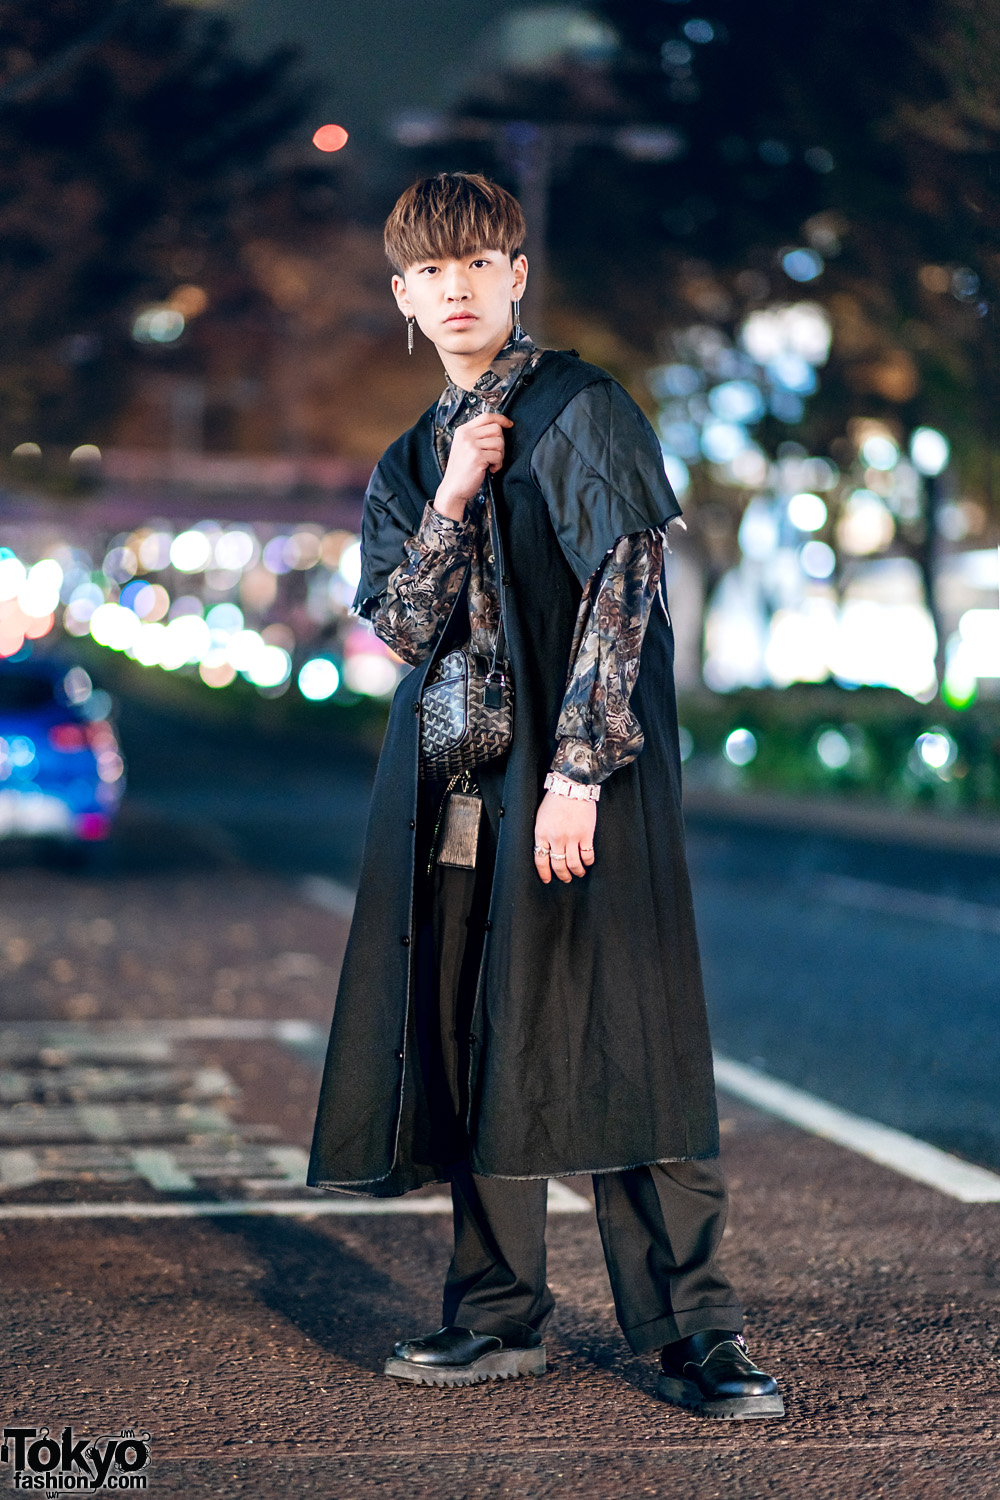 Menswear Street Style in Tokyo w/ Suede Coat, Floral Shirt, Comme des Garcons Cuffed Pants, Hare Buckle Shoes & Goyard Bag